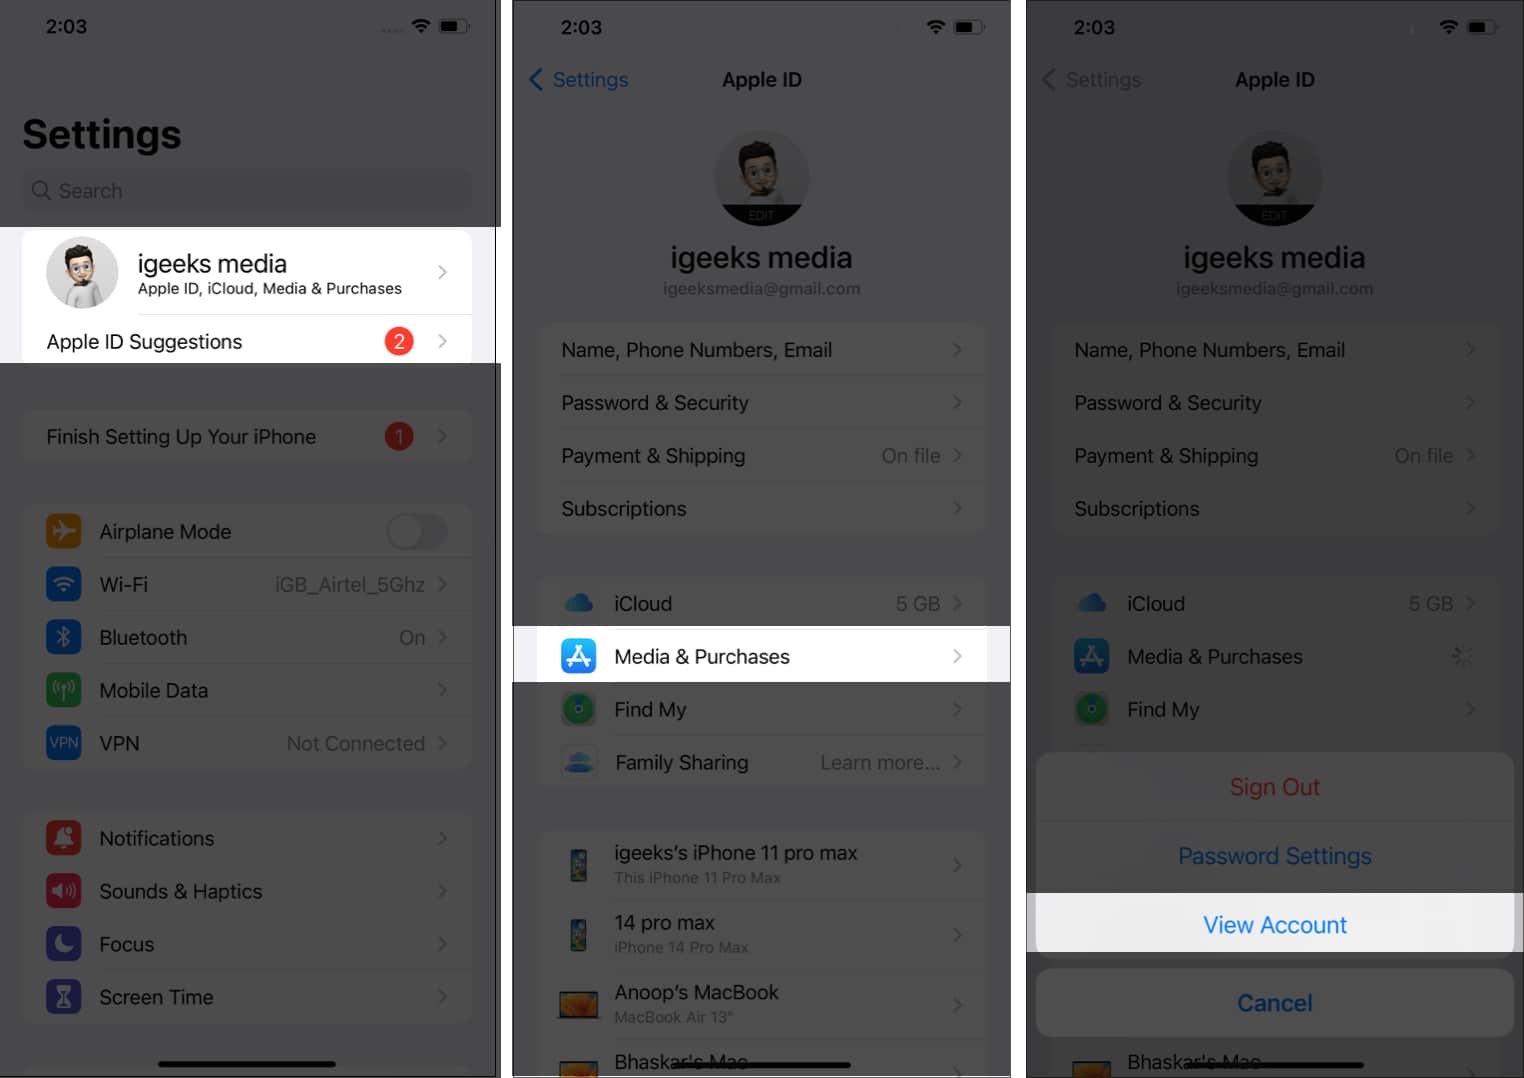 Apple id media and purchases view account in settings app